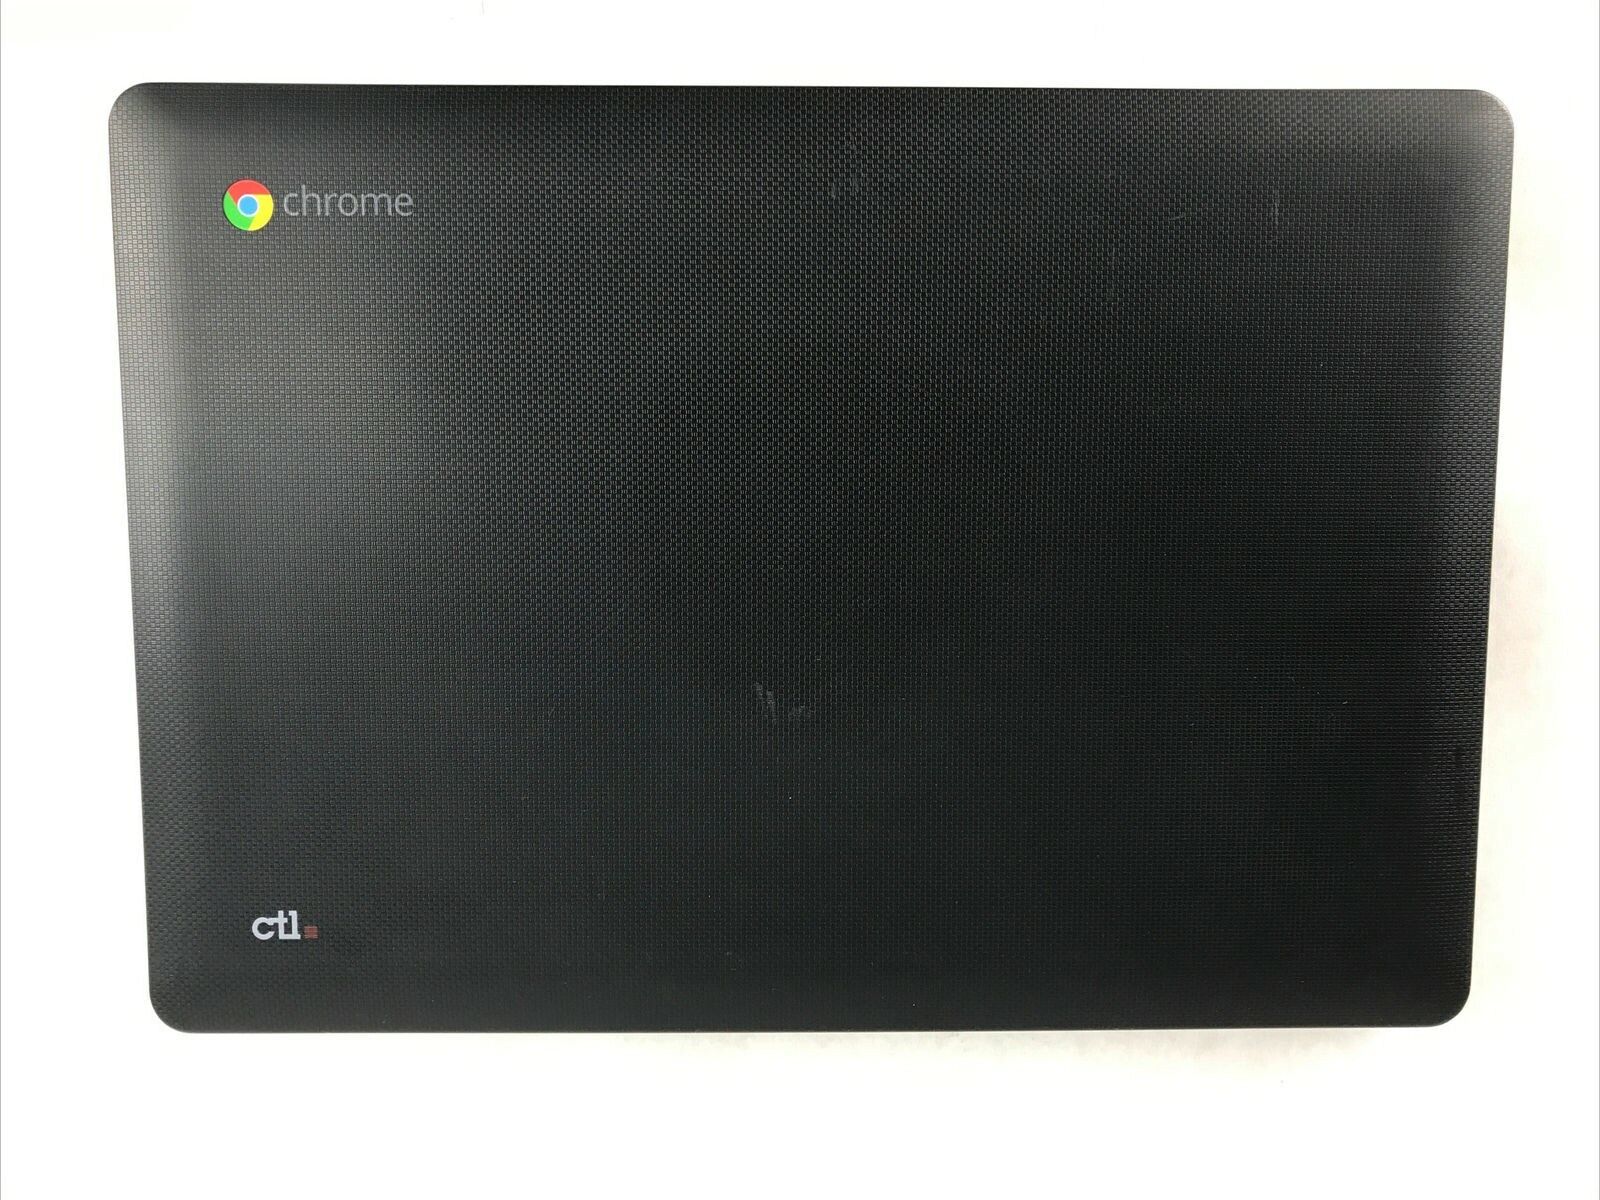 CTL Chromebook J2 11.6” 2GB RAM 16GB SSD WiFi Bluetooth Includes Charger